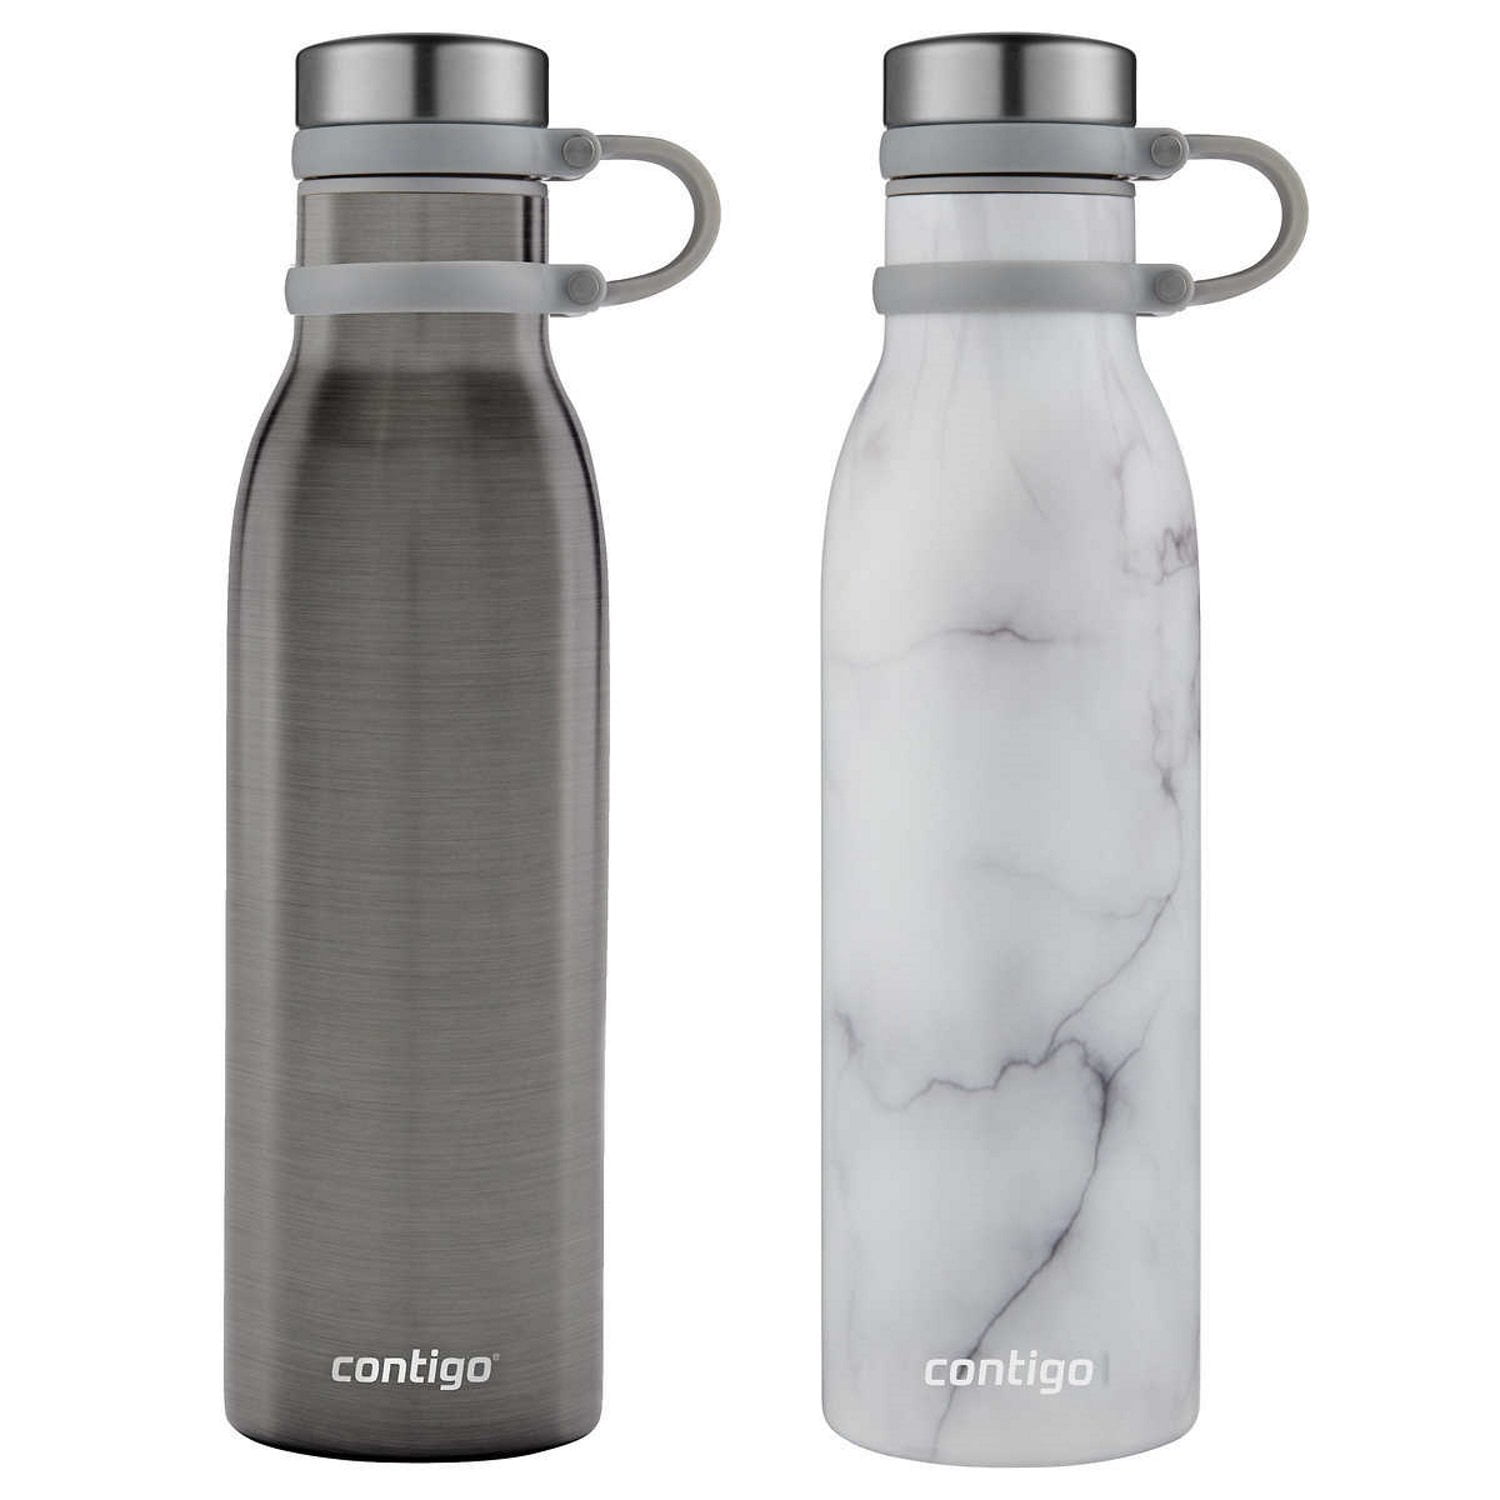 2 Pack Contigo Couture Collection Marble / Champagne Contigo Stainless Steel Water Bottles 20 oz